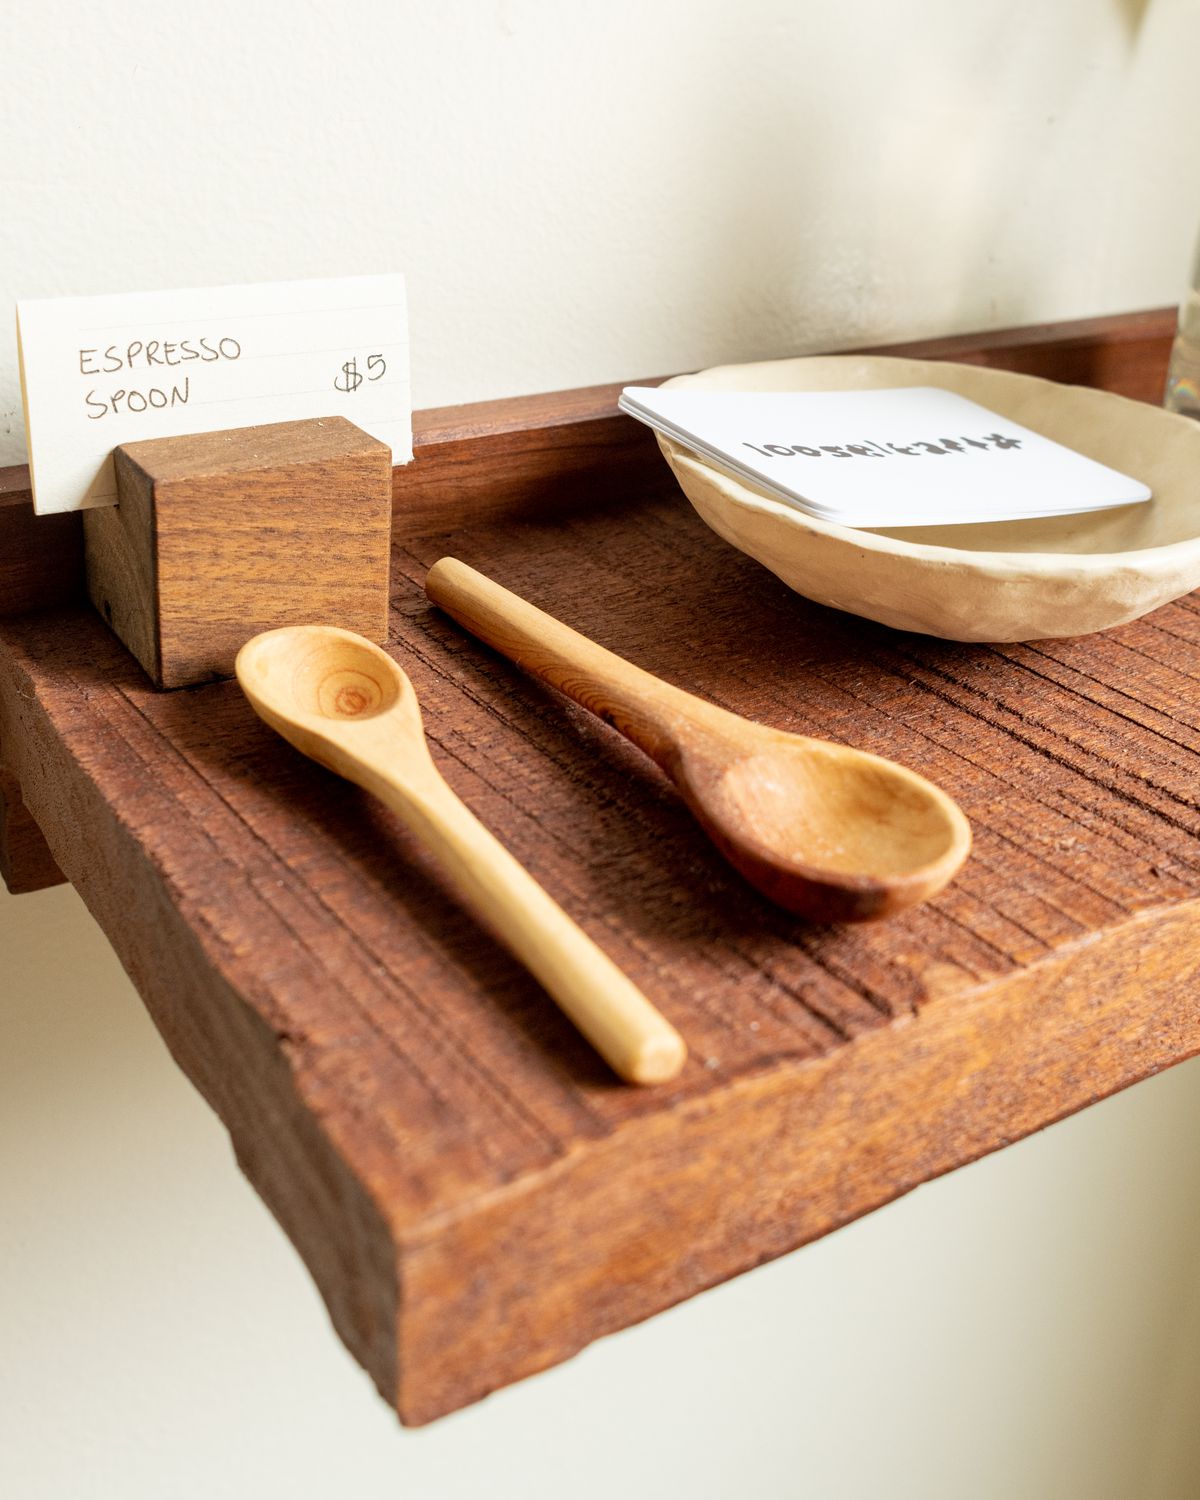 A wooden shelf holds carved wooden espresso spoons and a small ceramic dish.